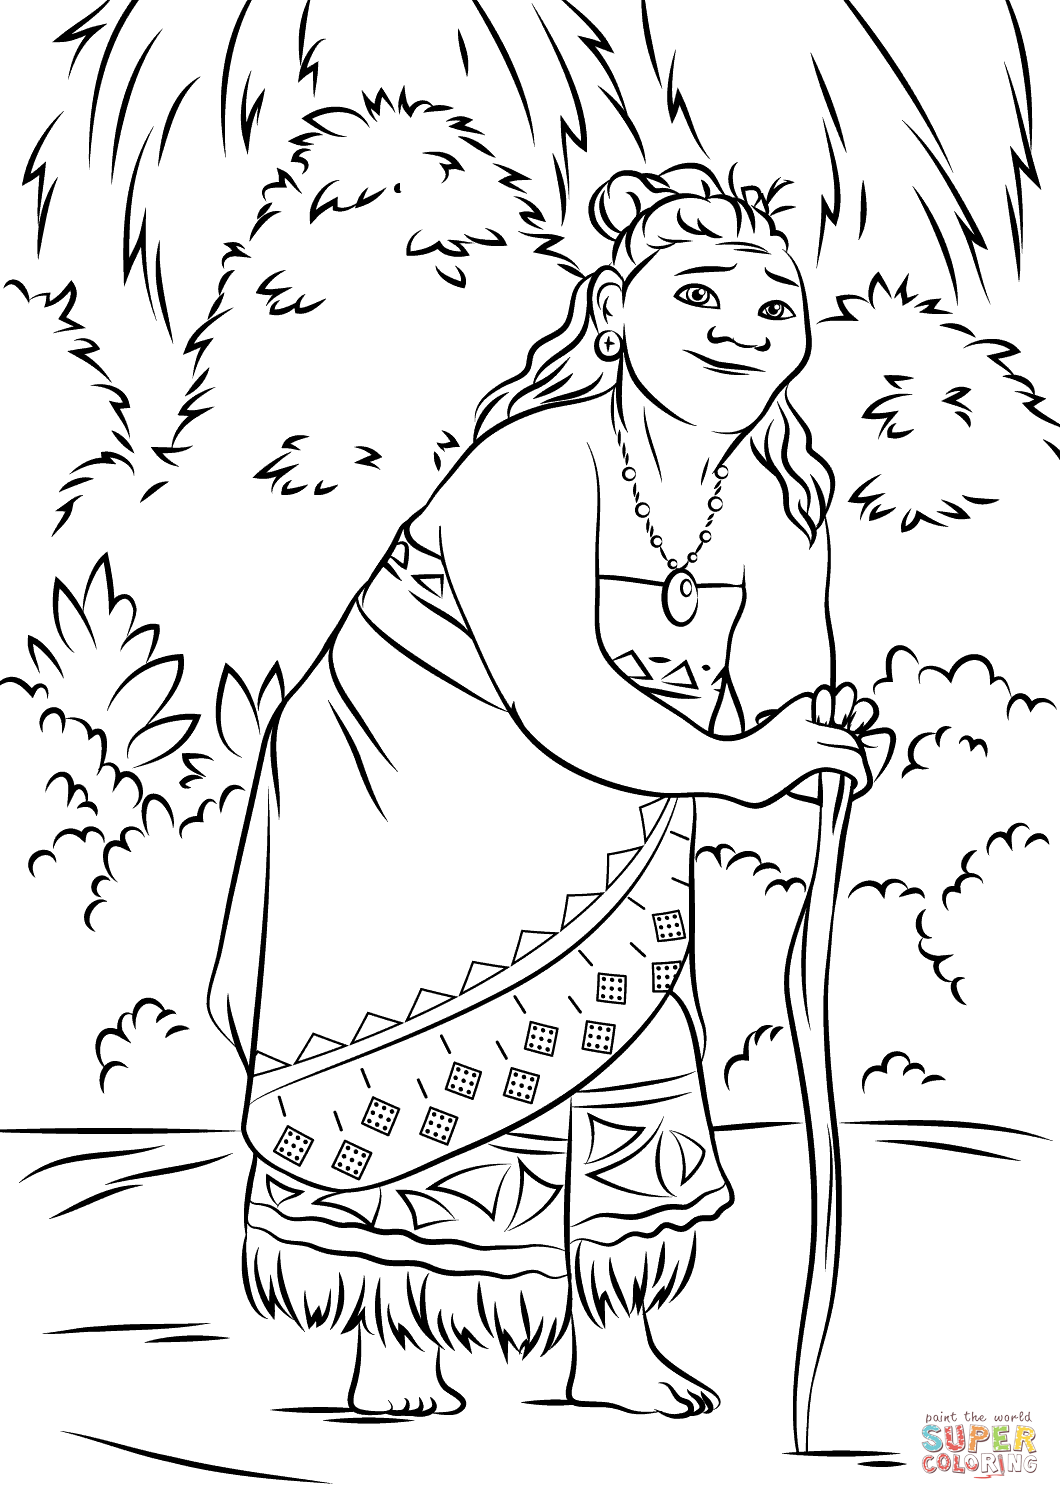 Gramma Tala from Moana coloring page | Free Printable Coloring Pages